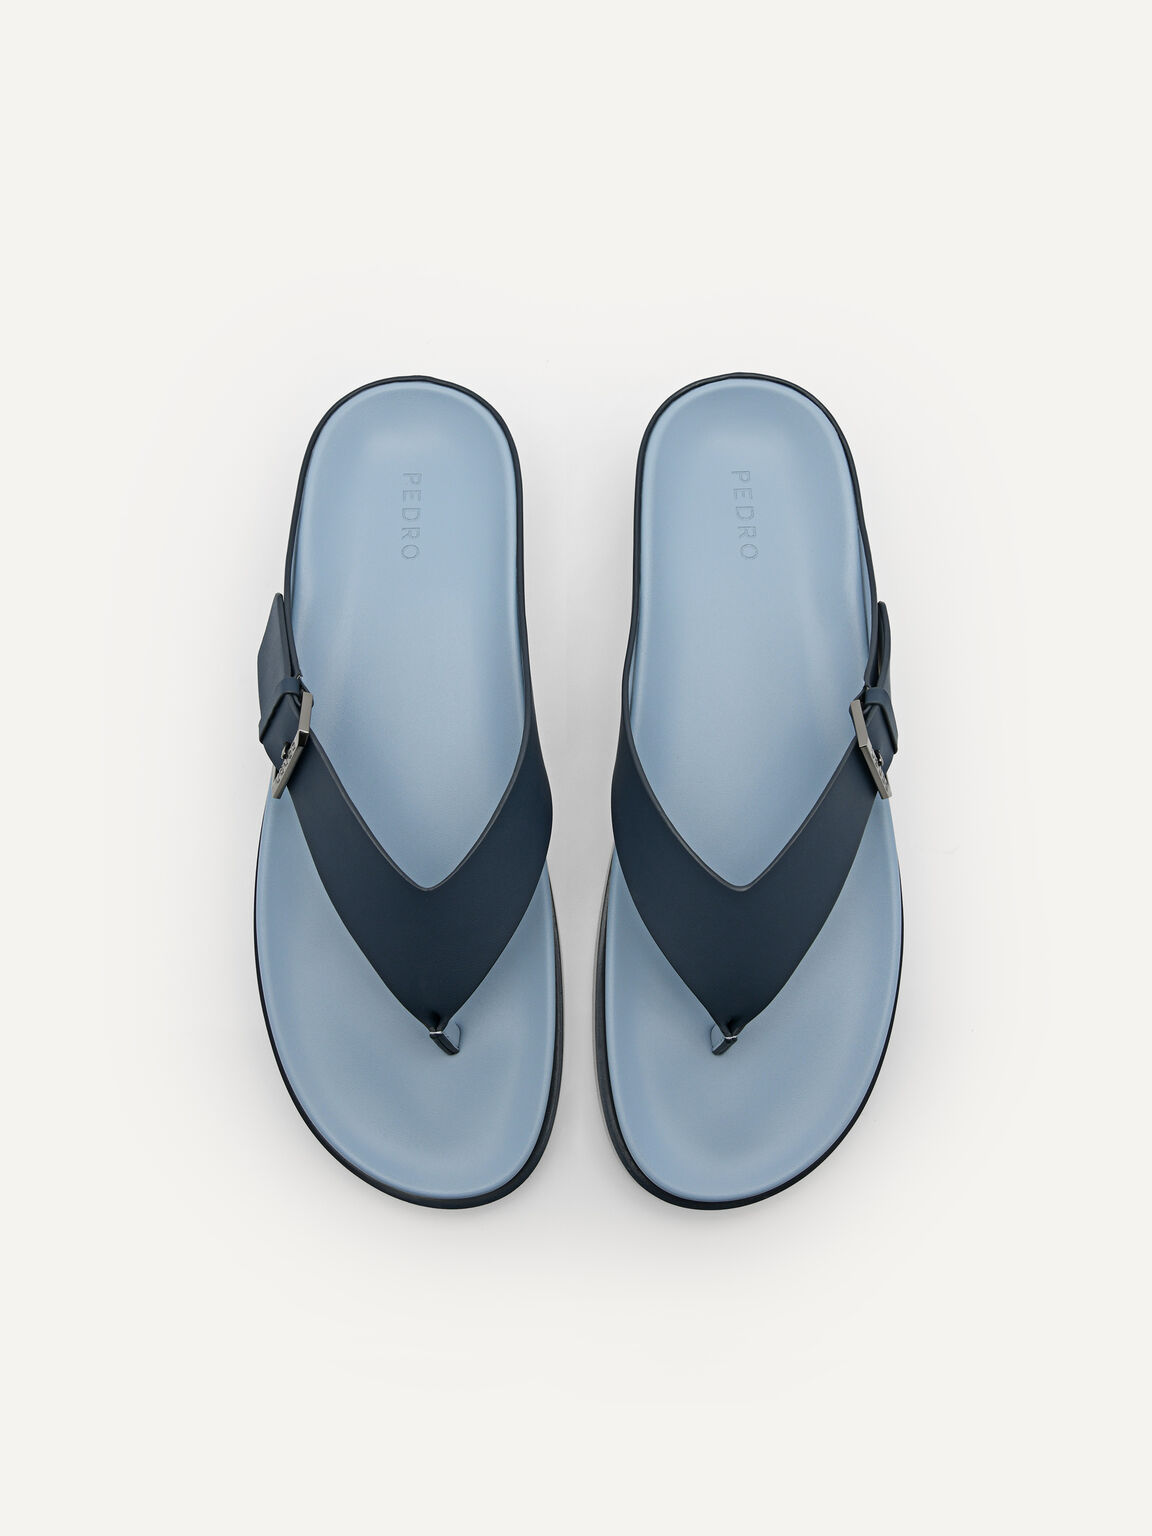 Buckle Thong Sandals, Navy